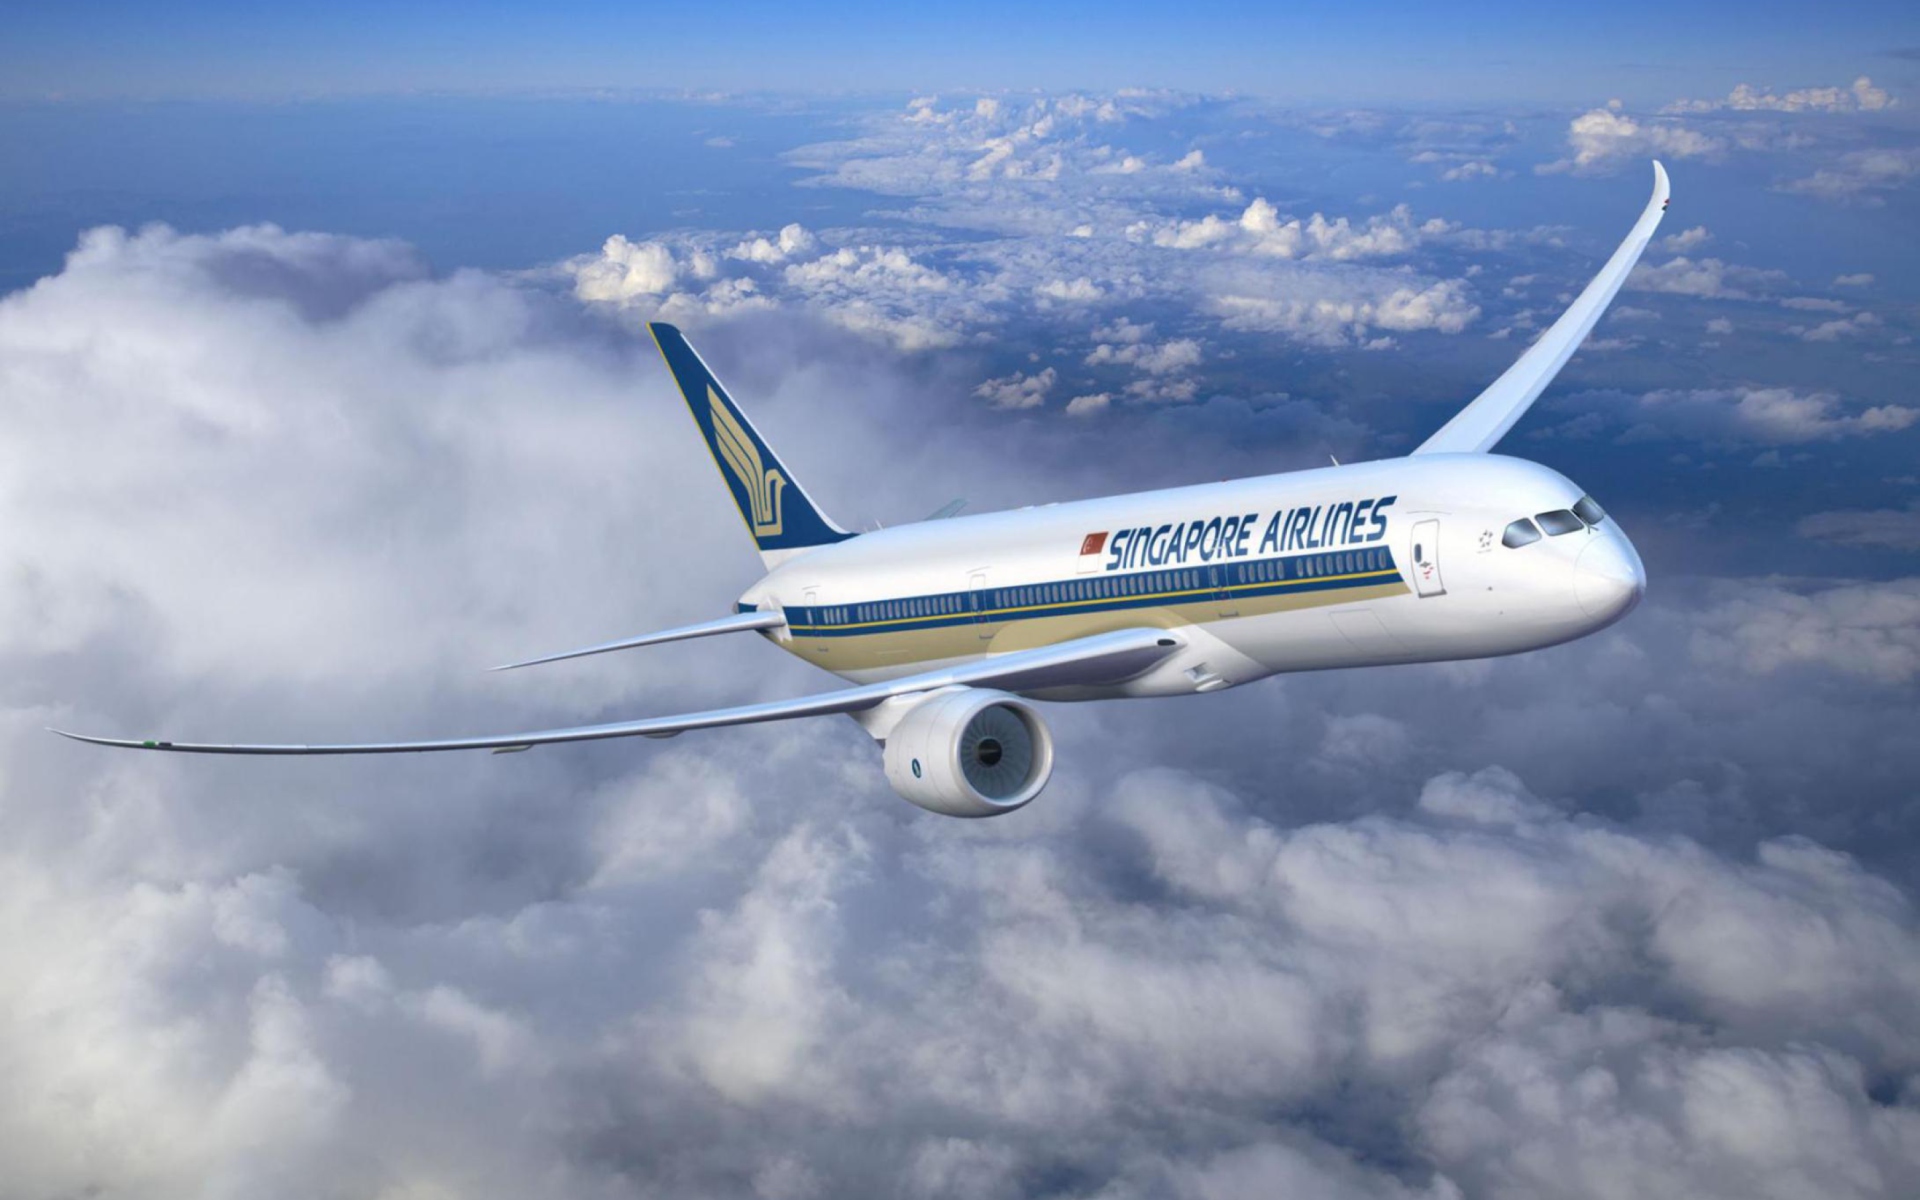 Singapore Airlines wallpaper 1920x1200